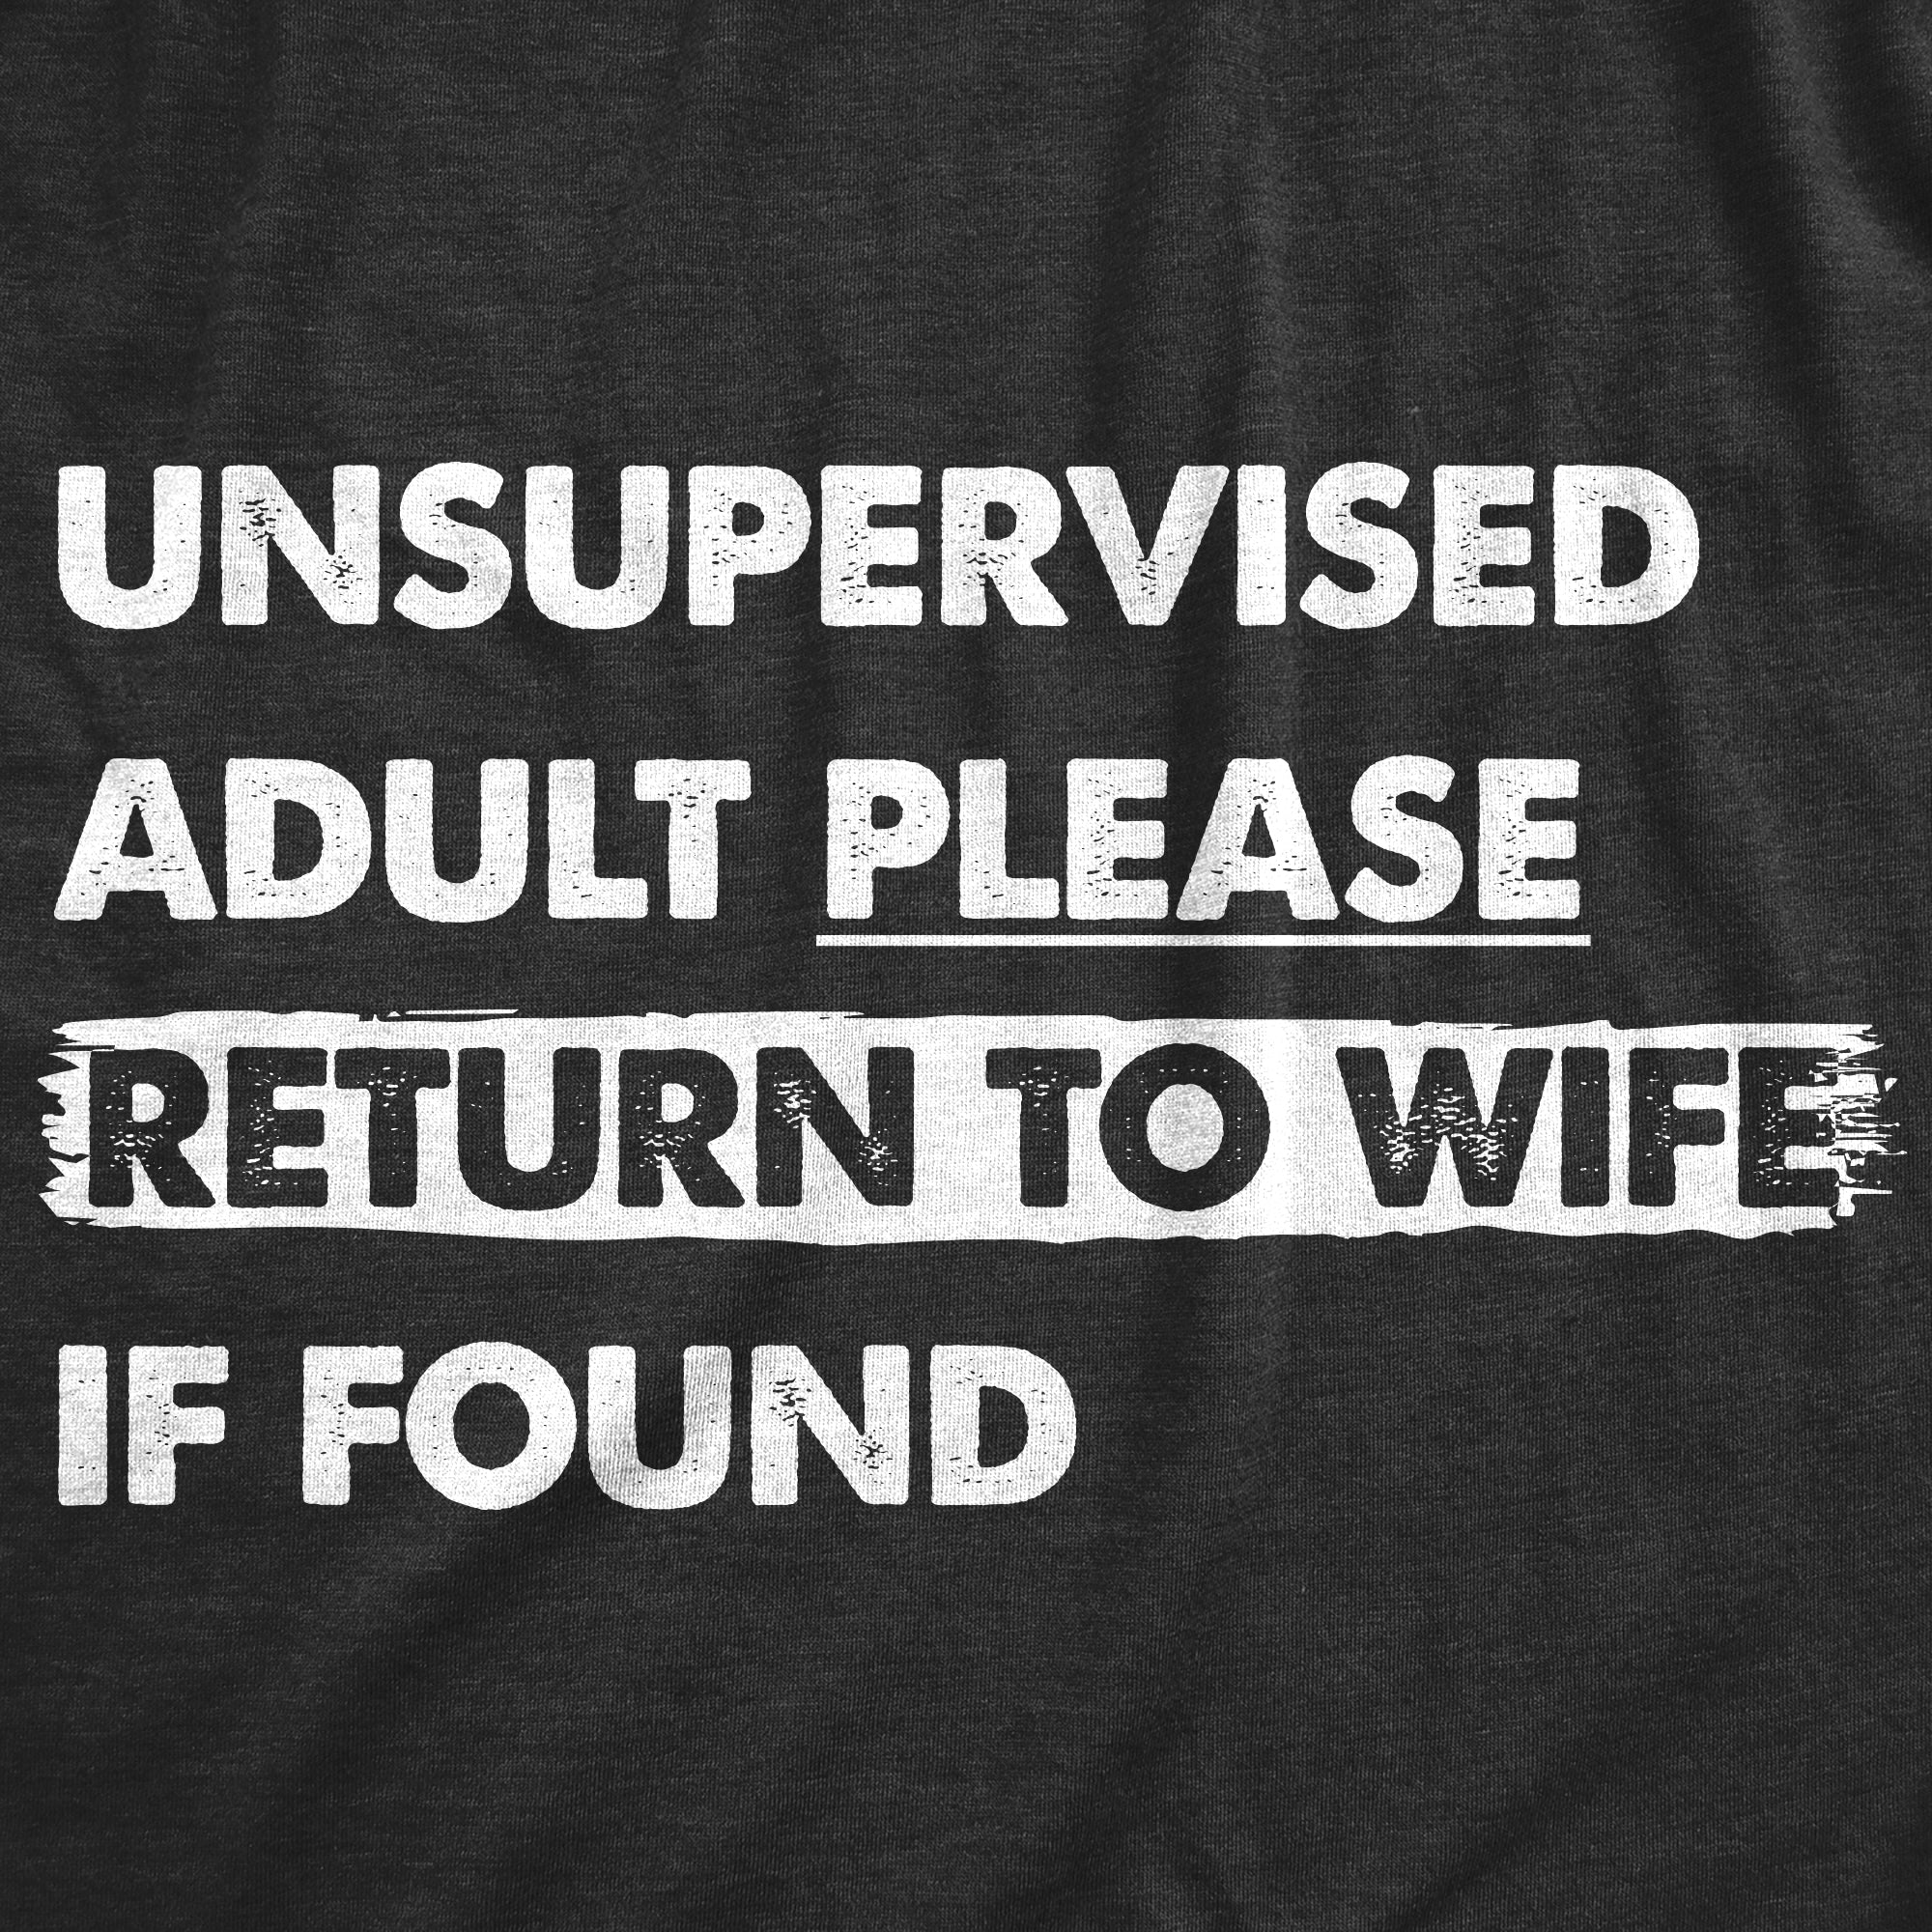 Funny Heather Black - RETURNTOWIFE Unsupervised Adult Please Return To Wife If Found Mens T Shirt Nerdy Sarcastic Tee